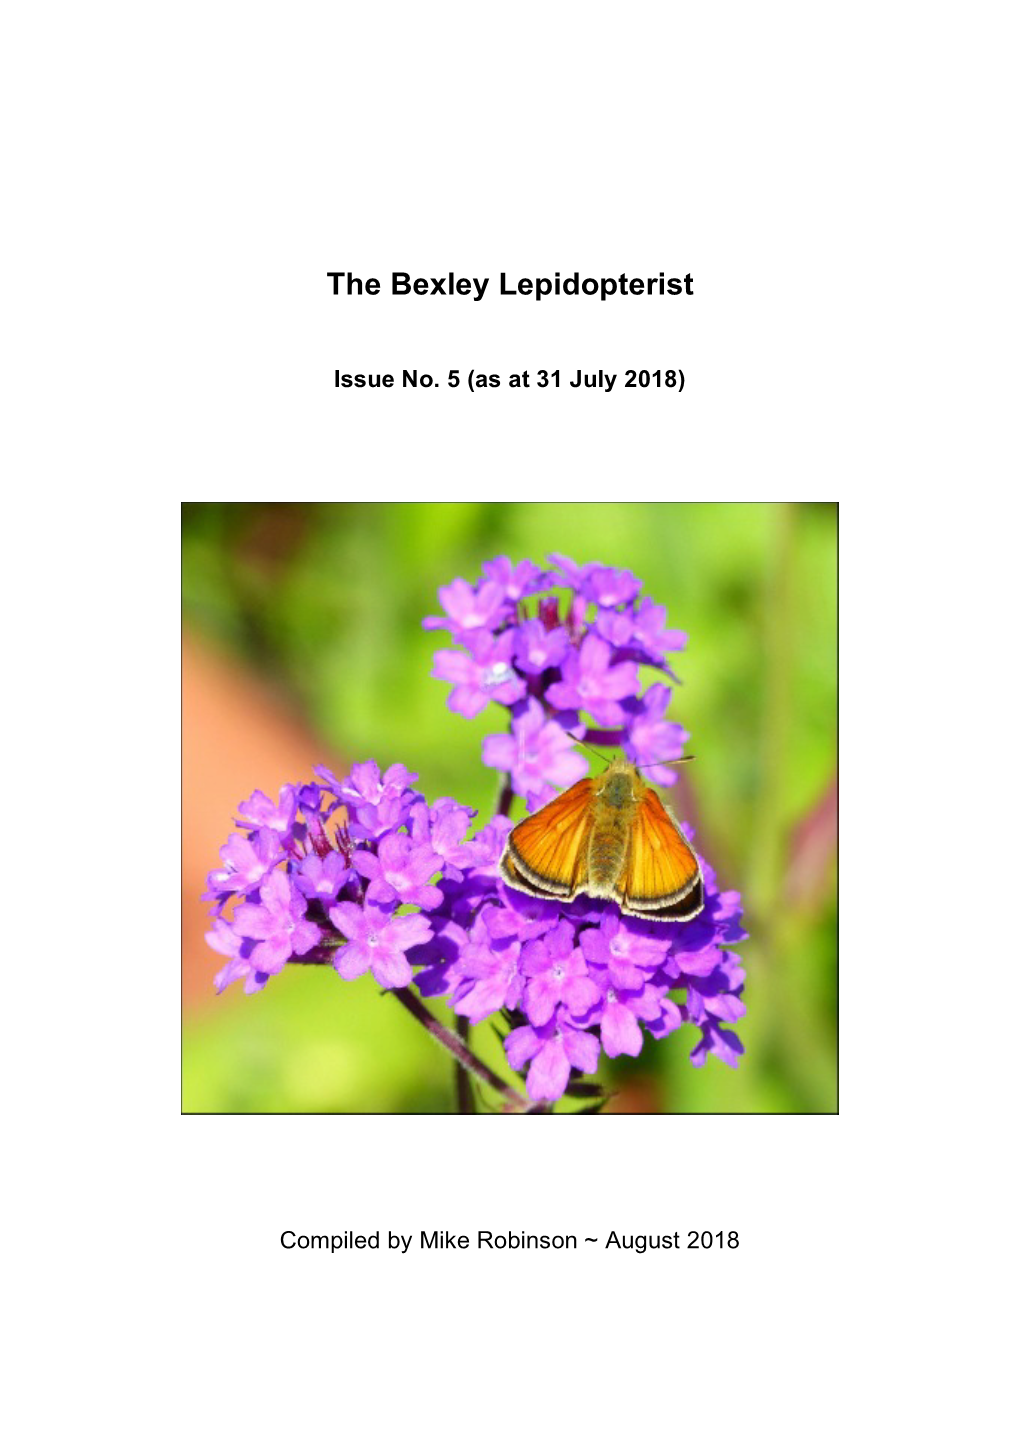 The Bexley Lepidopterist July 2018